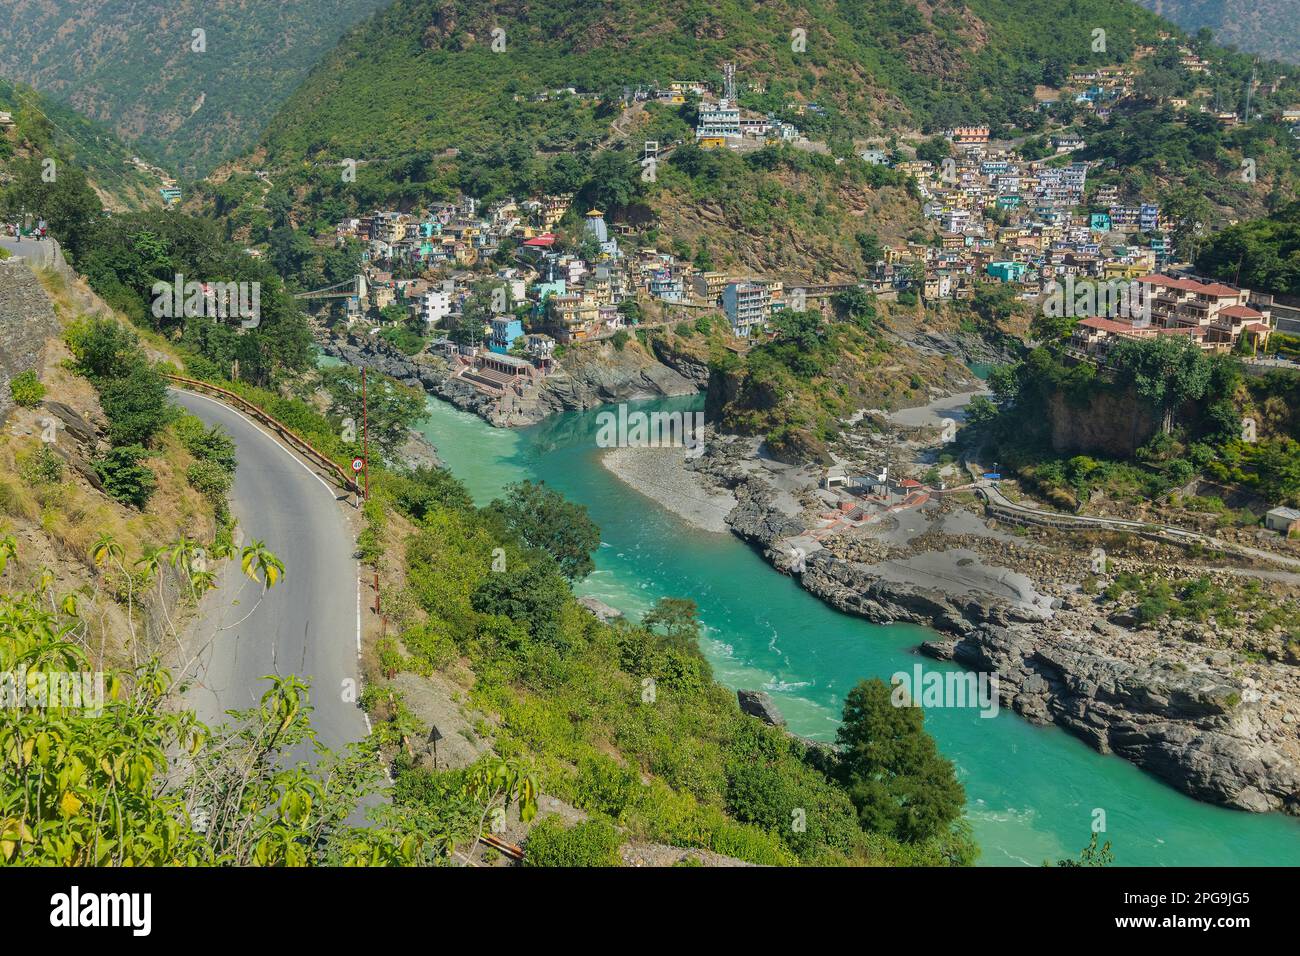 Devprayag, Godly Confluence,Garhwal,Uttarakhand, India. Here Alaknanda meets the Bhagirathi river and both rivers thereafter flow on as Ganges river. Stock Photo